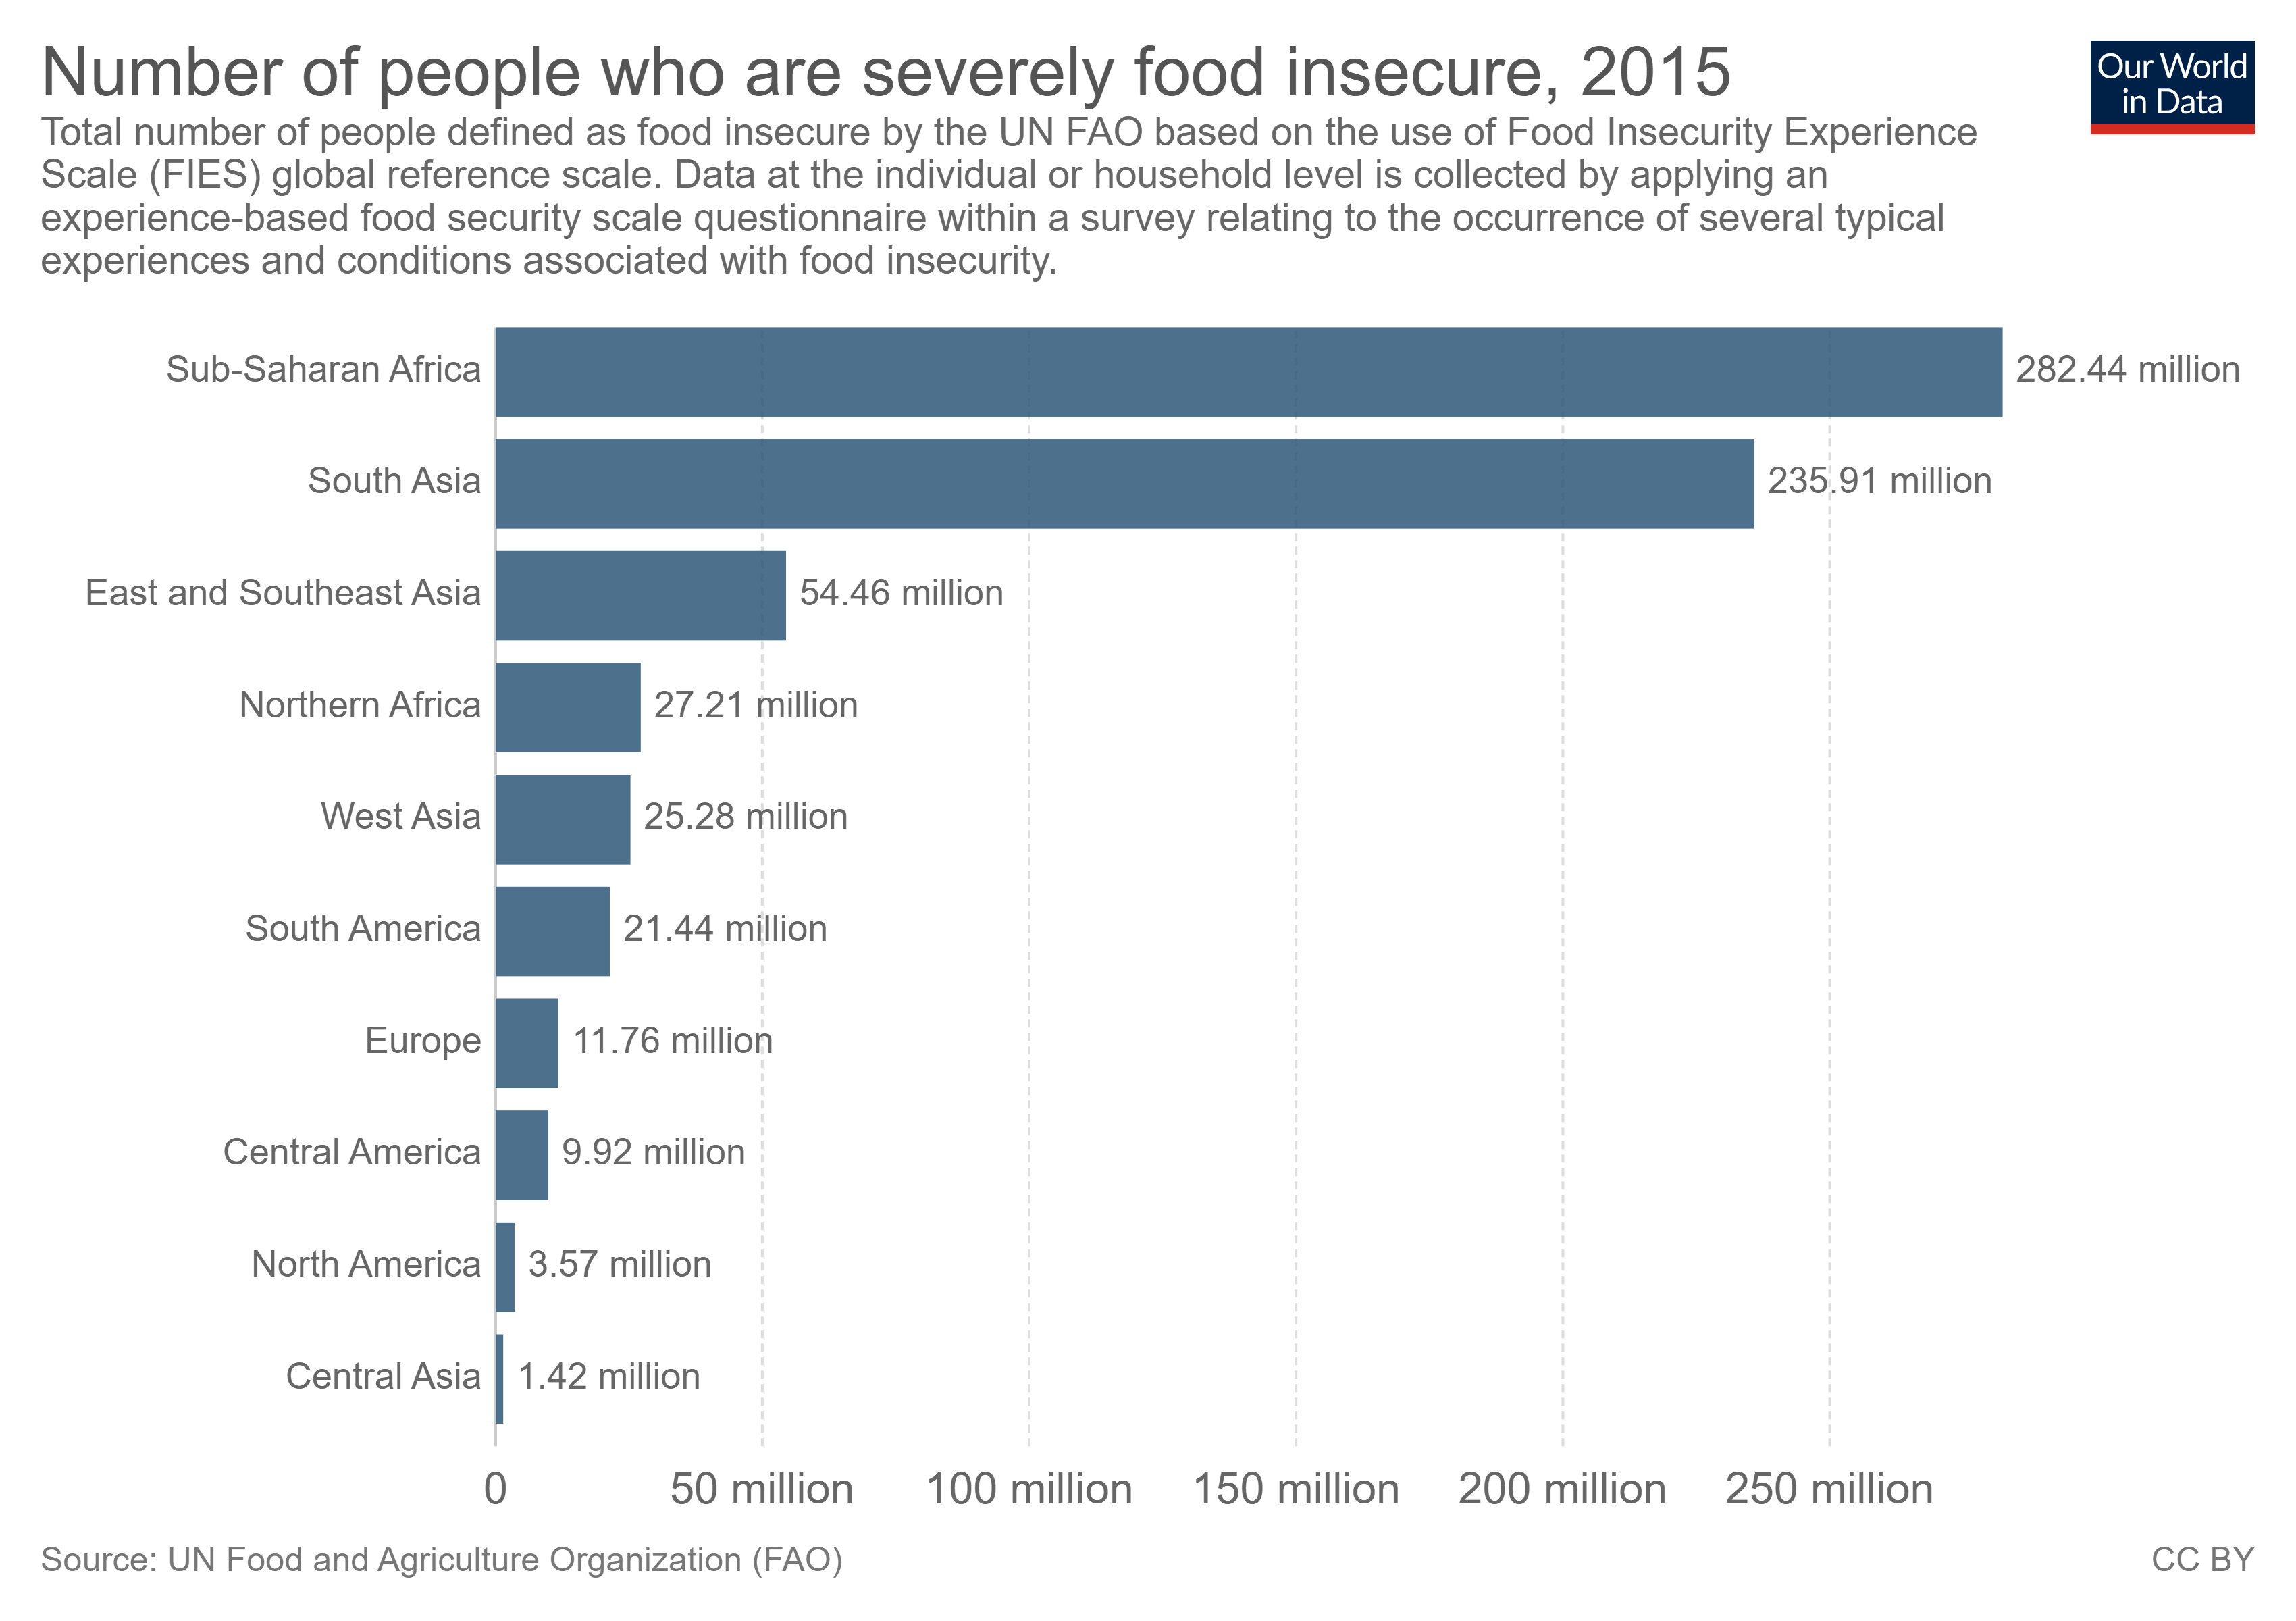 File:Number-of-people-severely-food-insecure.png